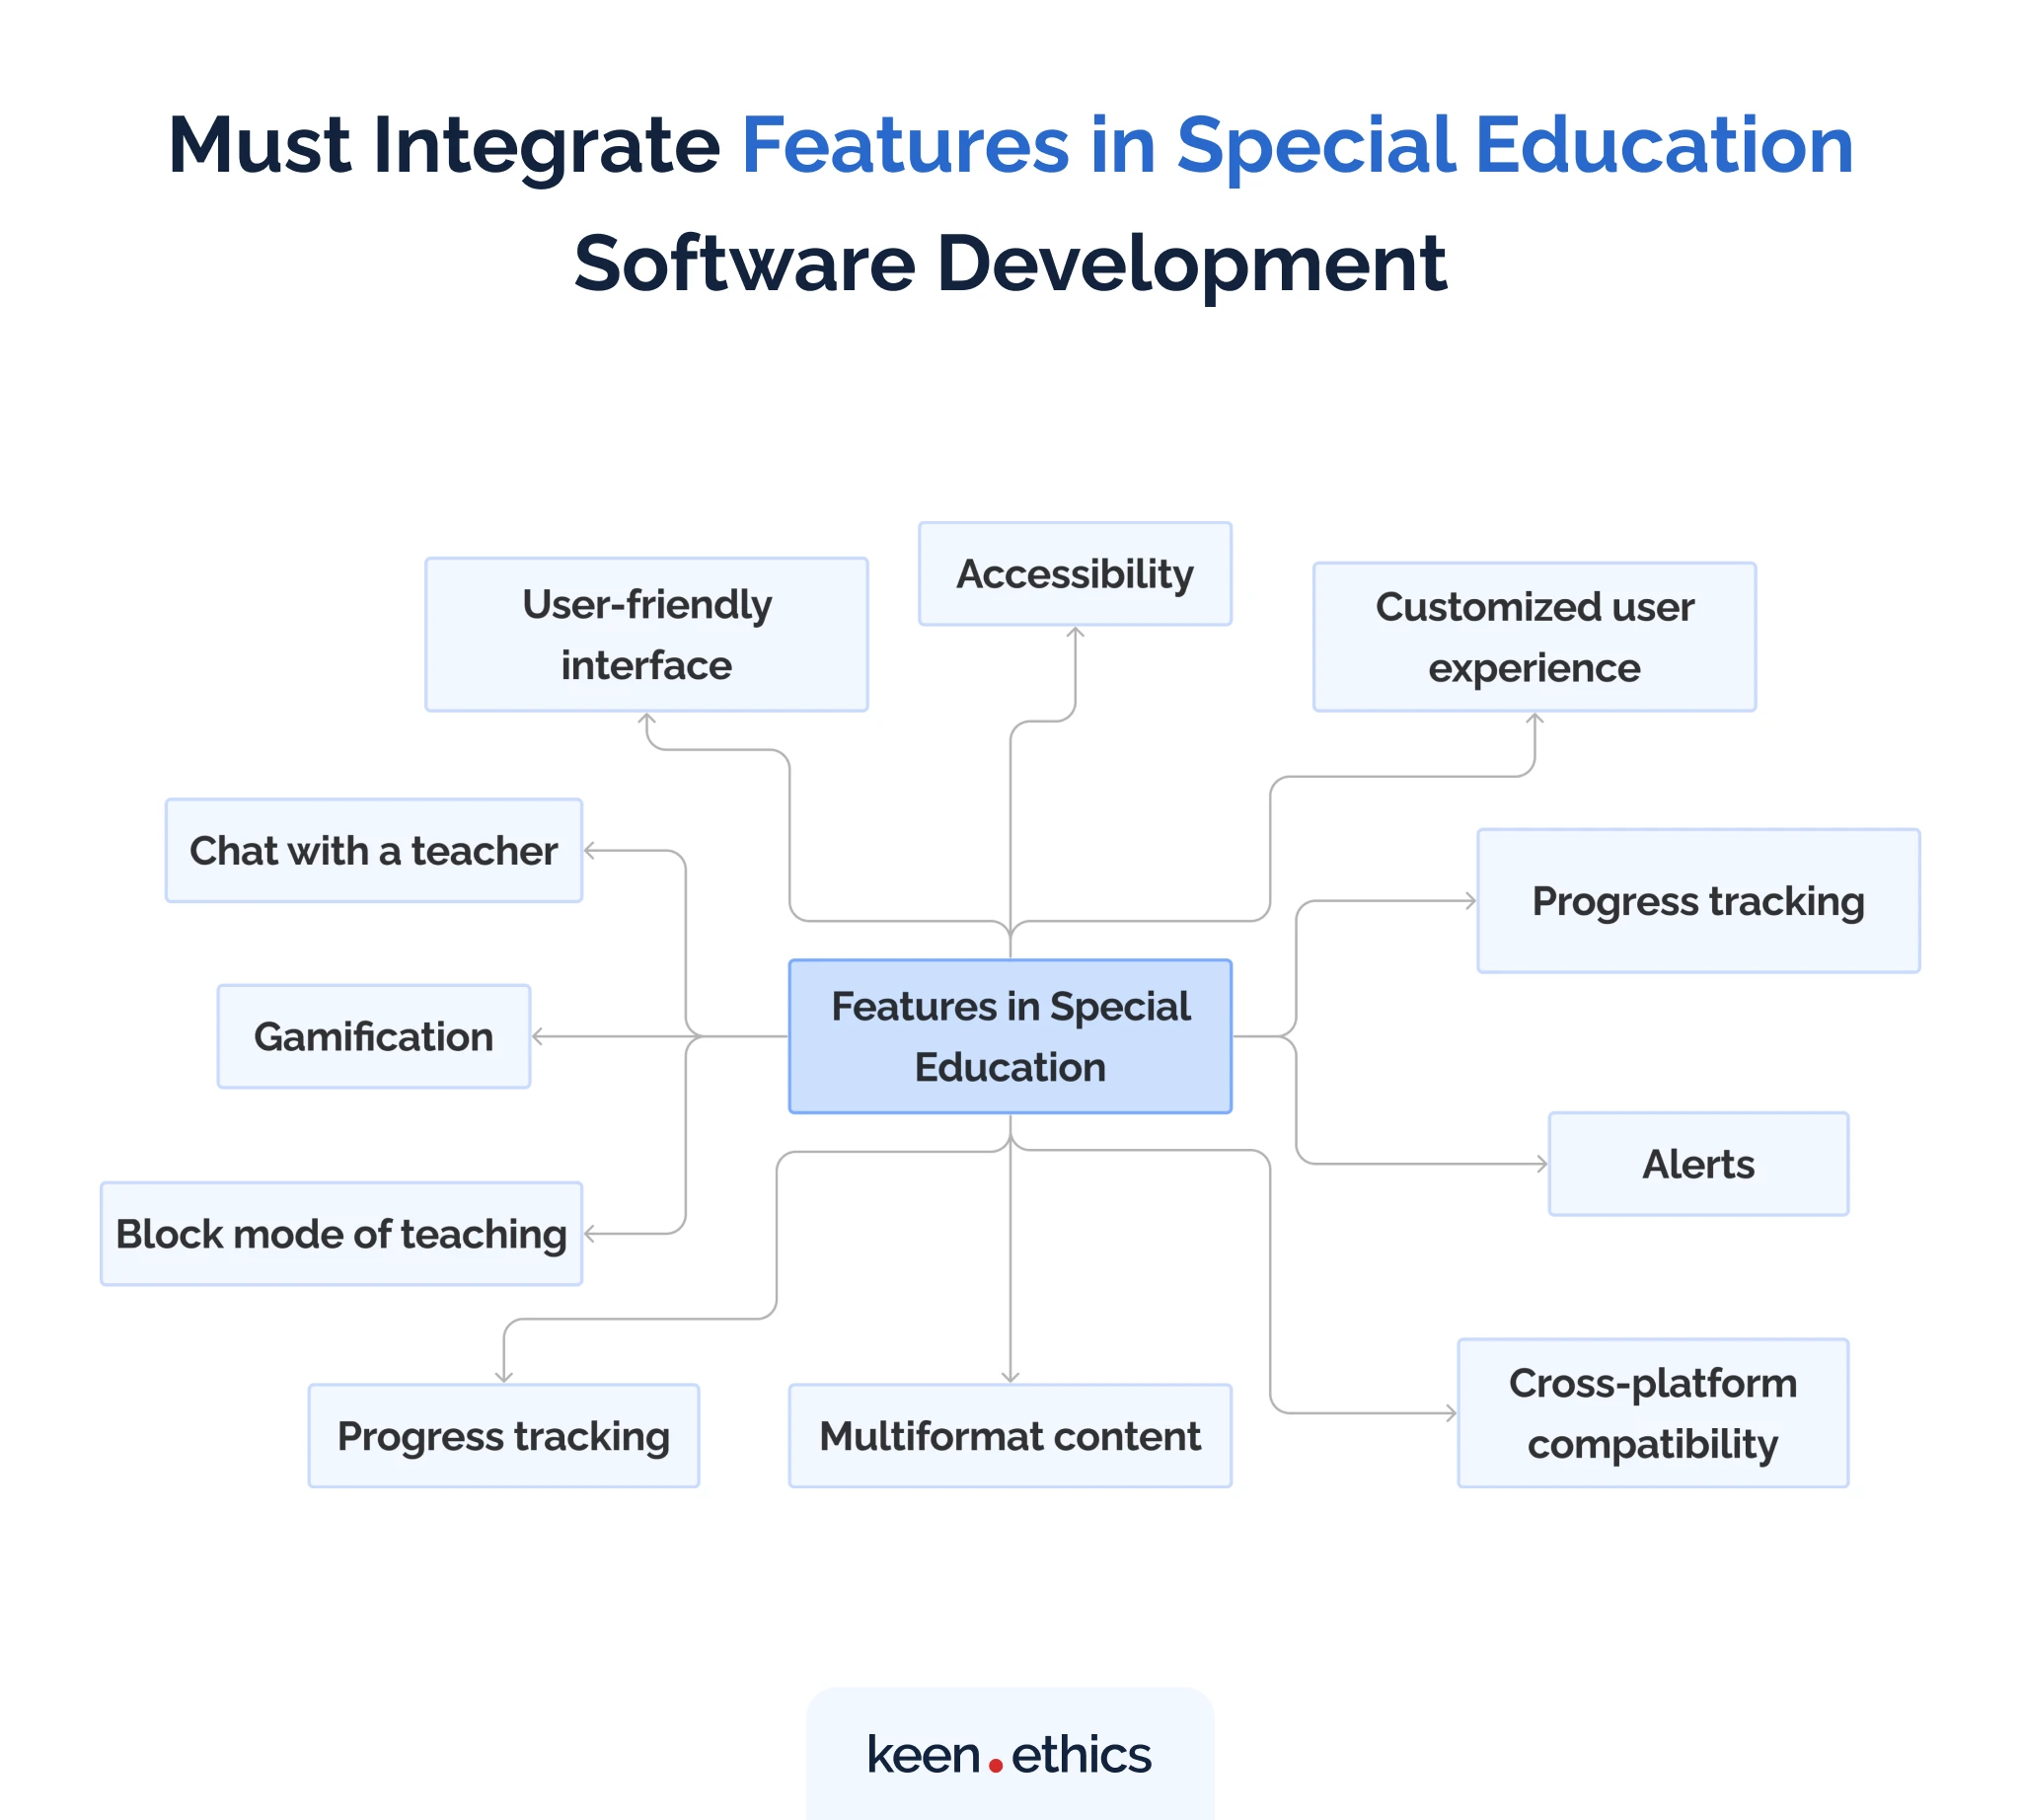 Must Integrate Features in Special Education Software Development